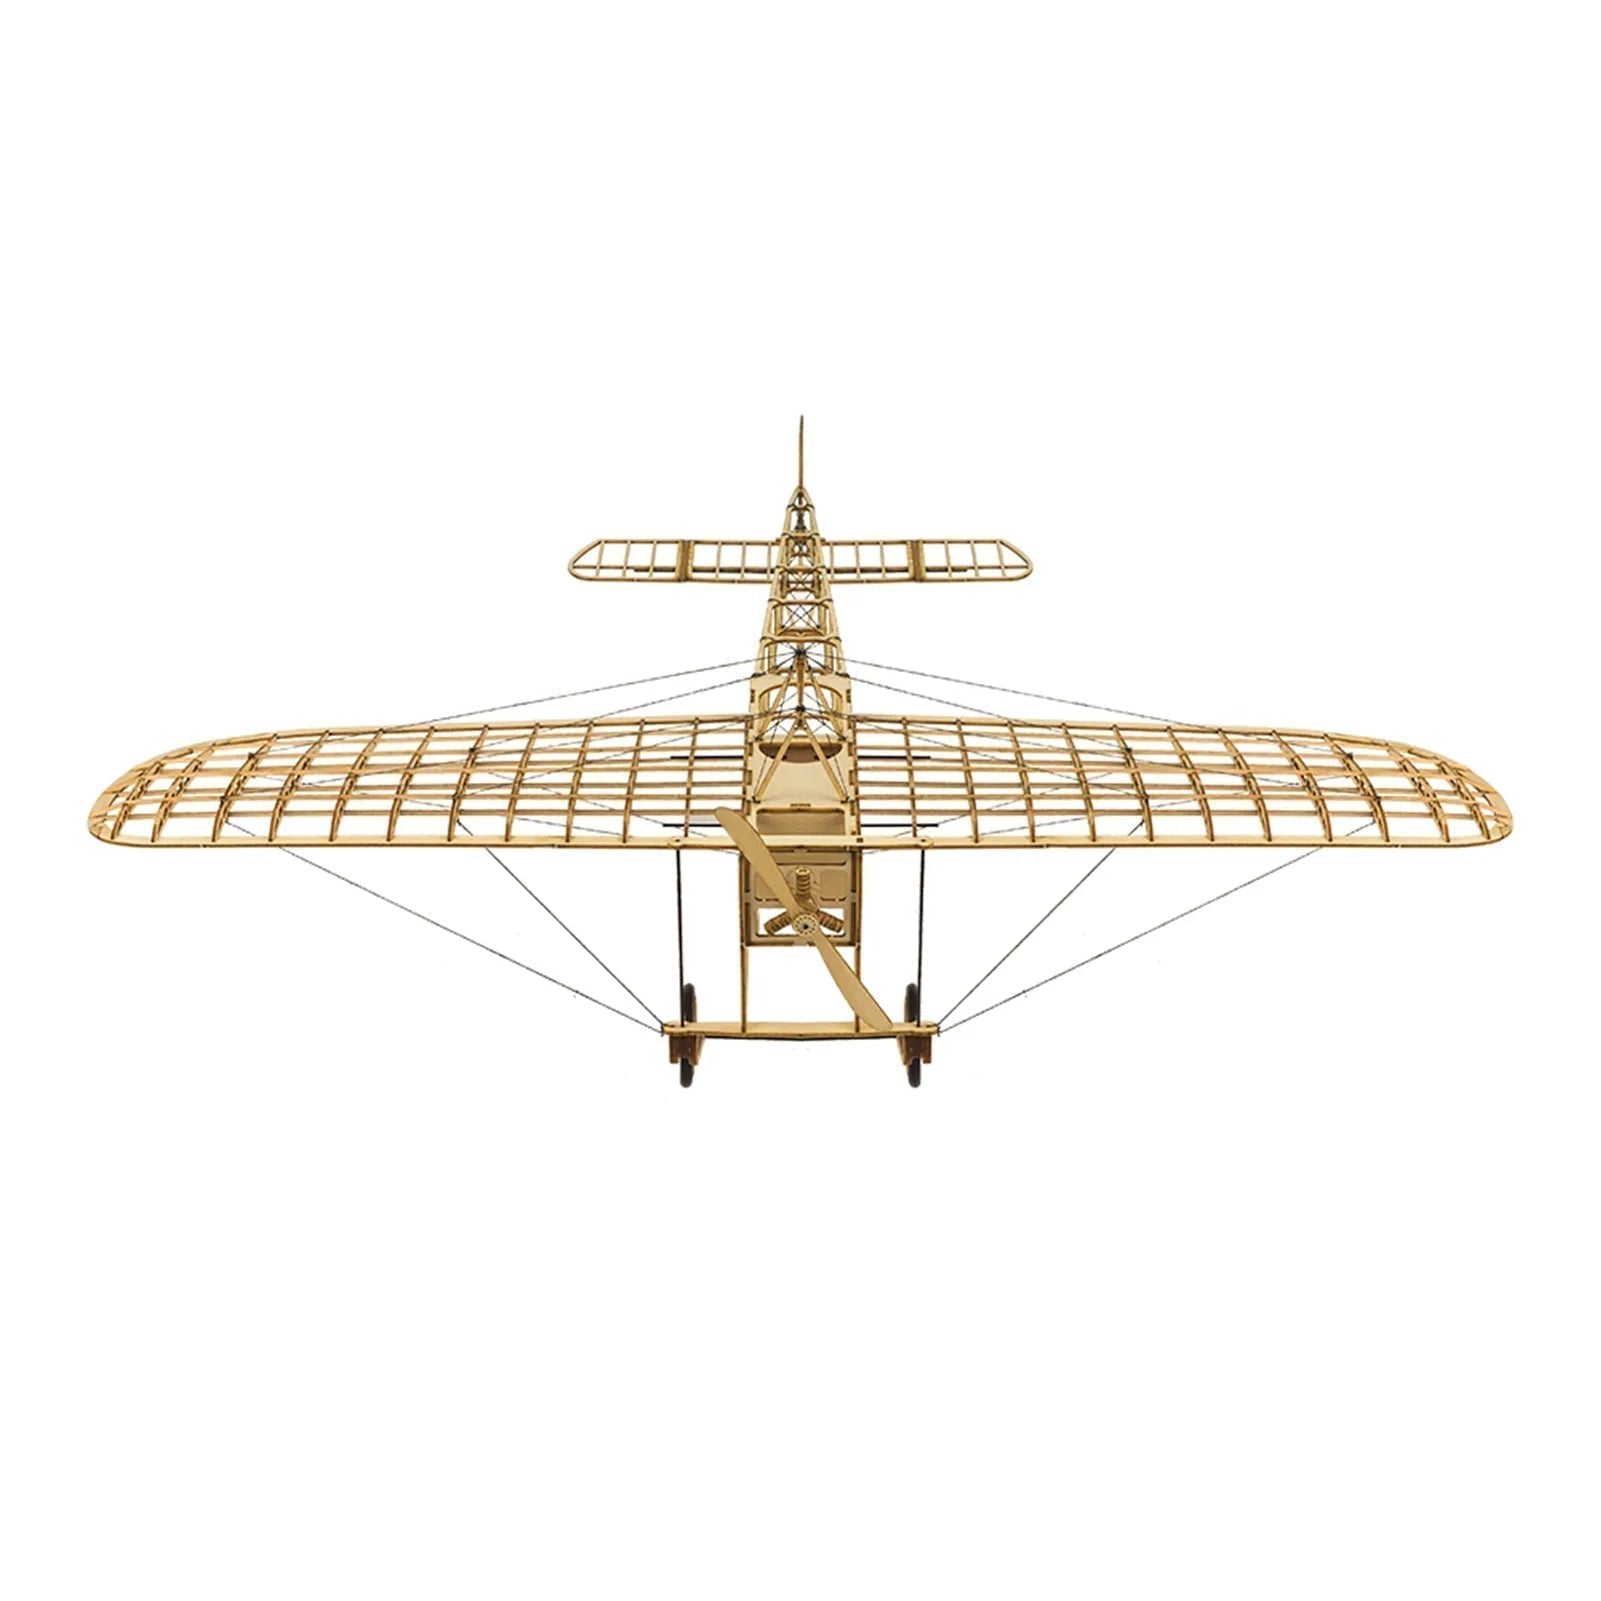 DWH VX14 Wooden 1:23 Scale Bleriot XI Airplane Model Ziggy's Pop Toy Shoppe